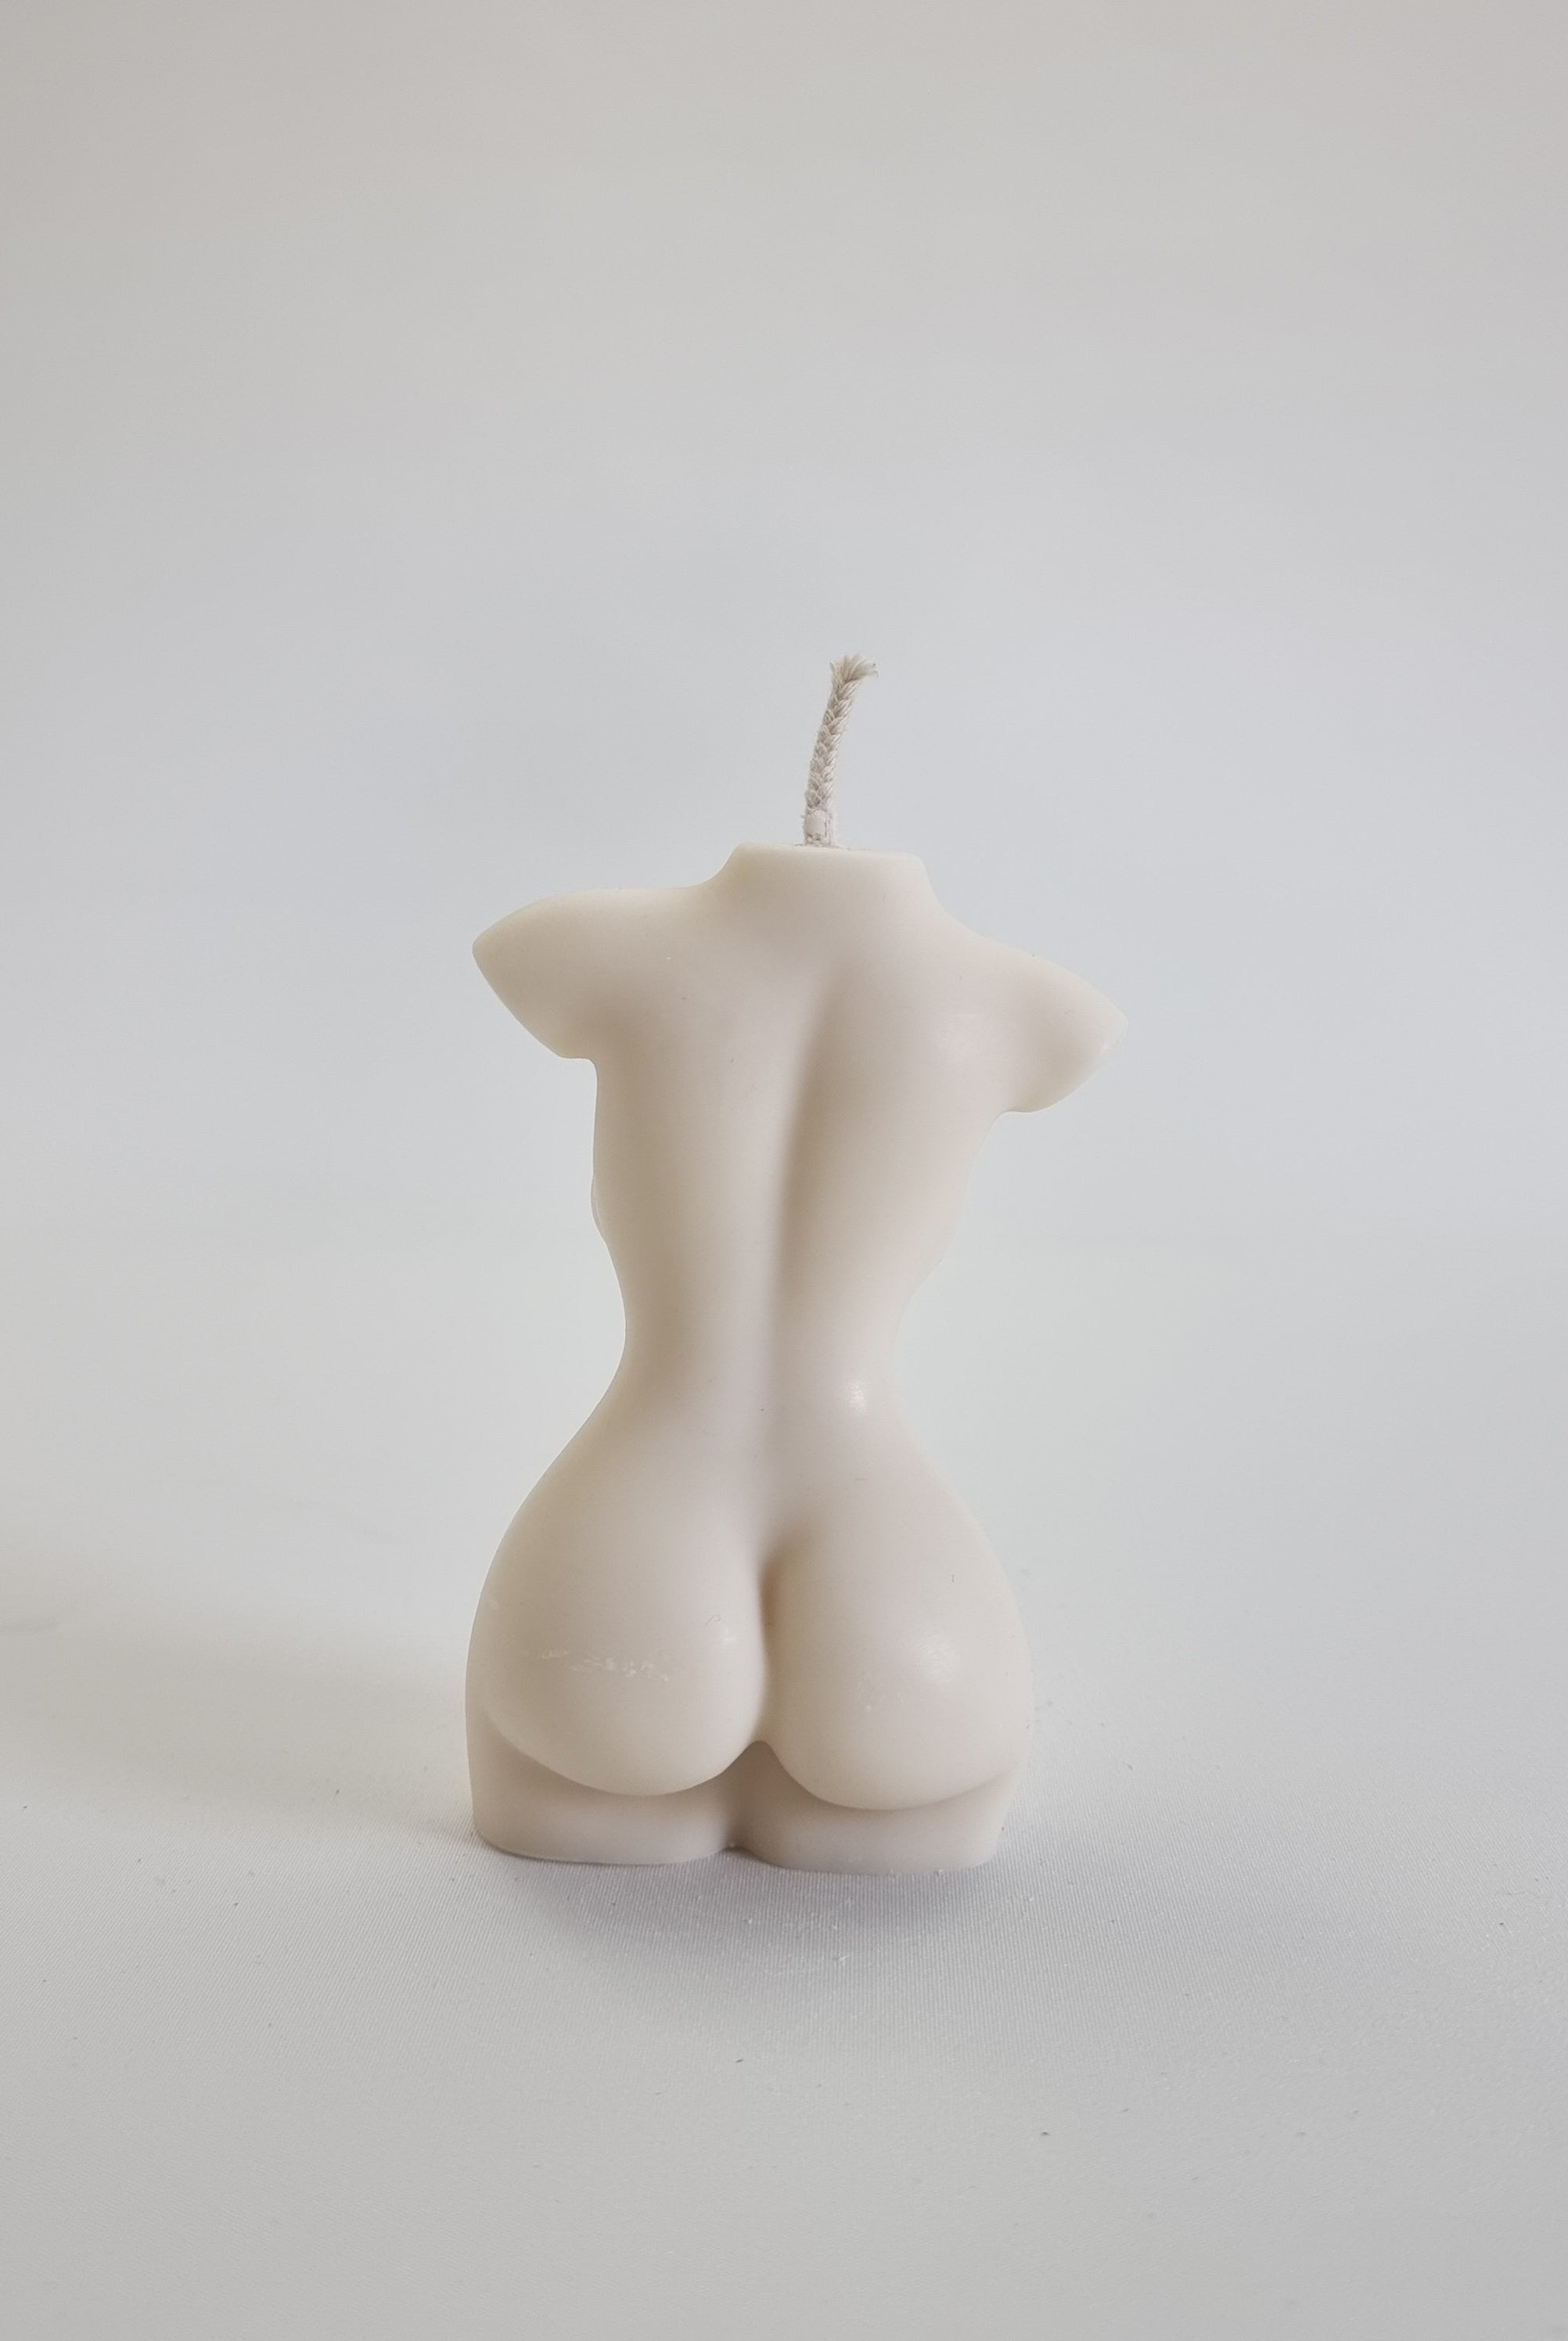 Curvy Female Body Candle Mould (L) - 16cm 2 - Silicone Mould, Mold for DIY Candles. Created using candle making kit with cotton candle wicks and candle colour chips. Using soy wax for pillar candles. Sold by Myka Candles Moulds Australia